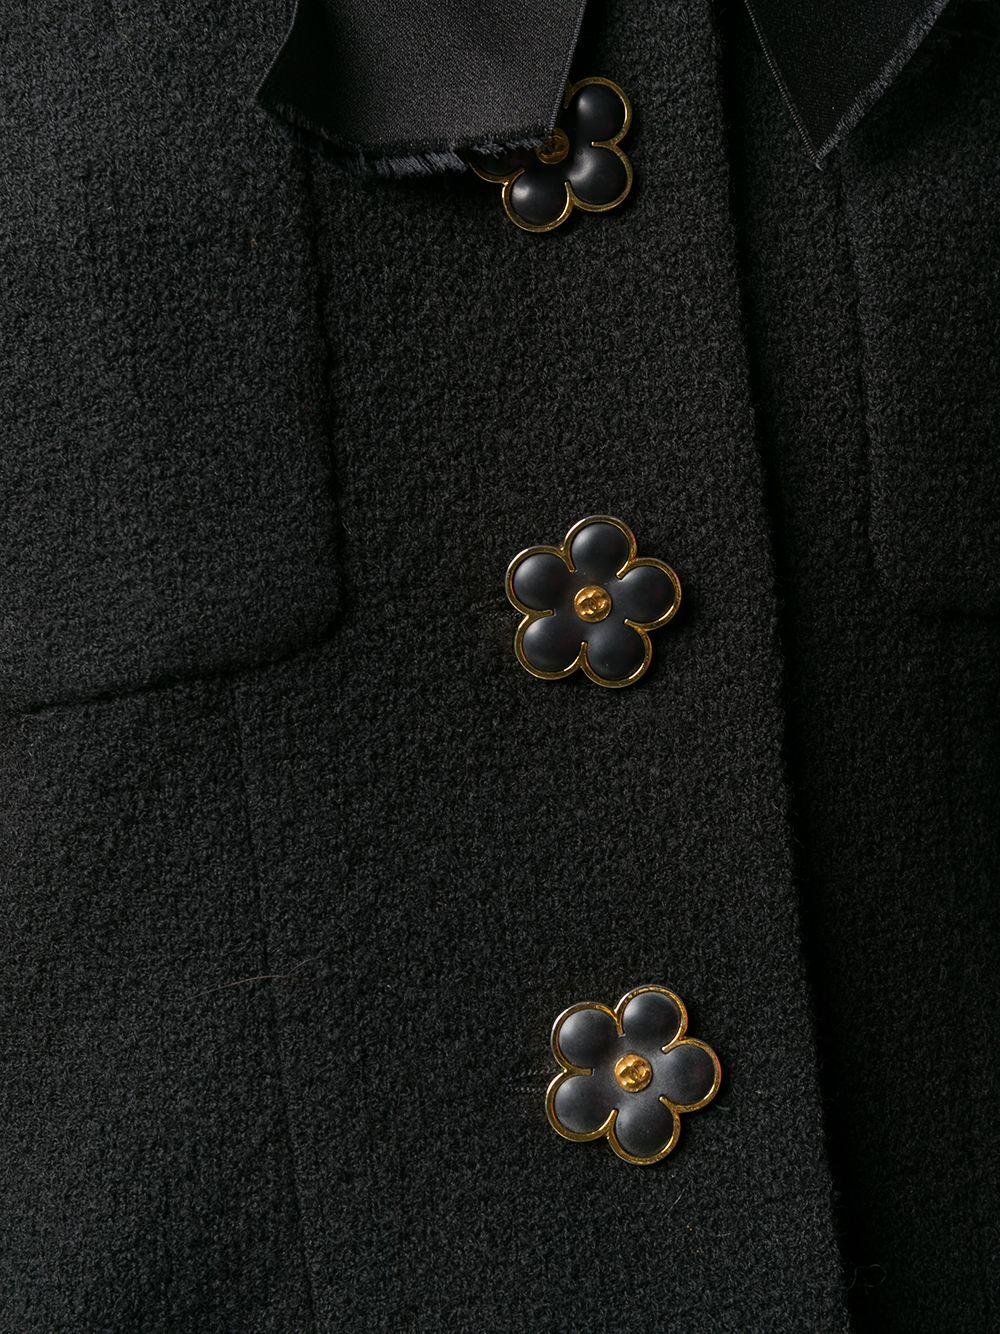 Expertly cut and crafted in France from pure black wool, this pre-owned, long-sleeved jacket from Chanel showcases long sleeved design, with a pointed collar and a distinctive front bow fastening. The front button fastening is embellished with the